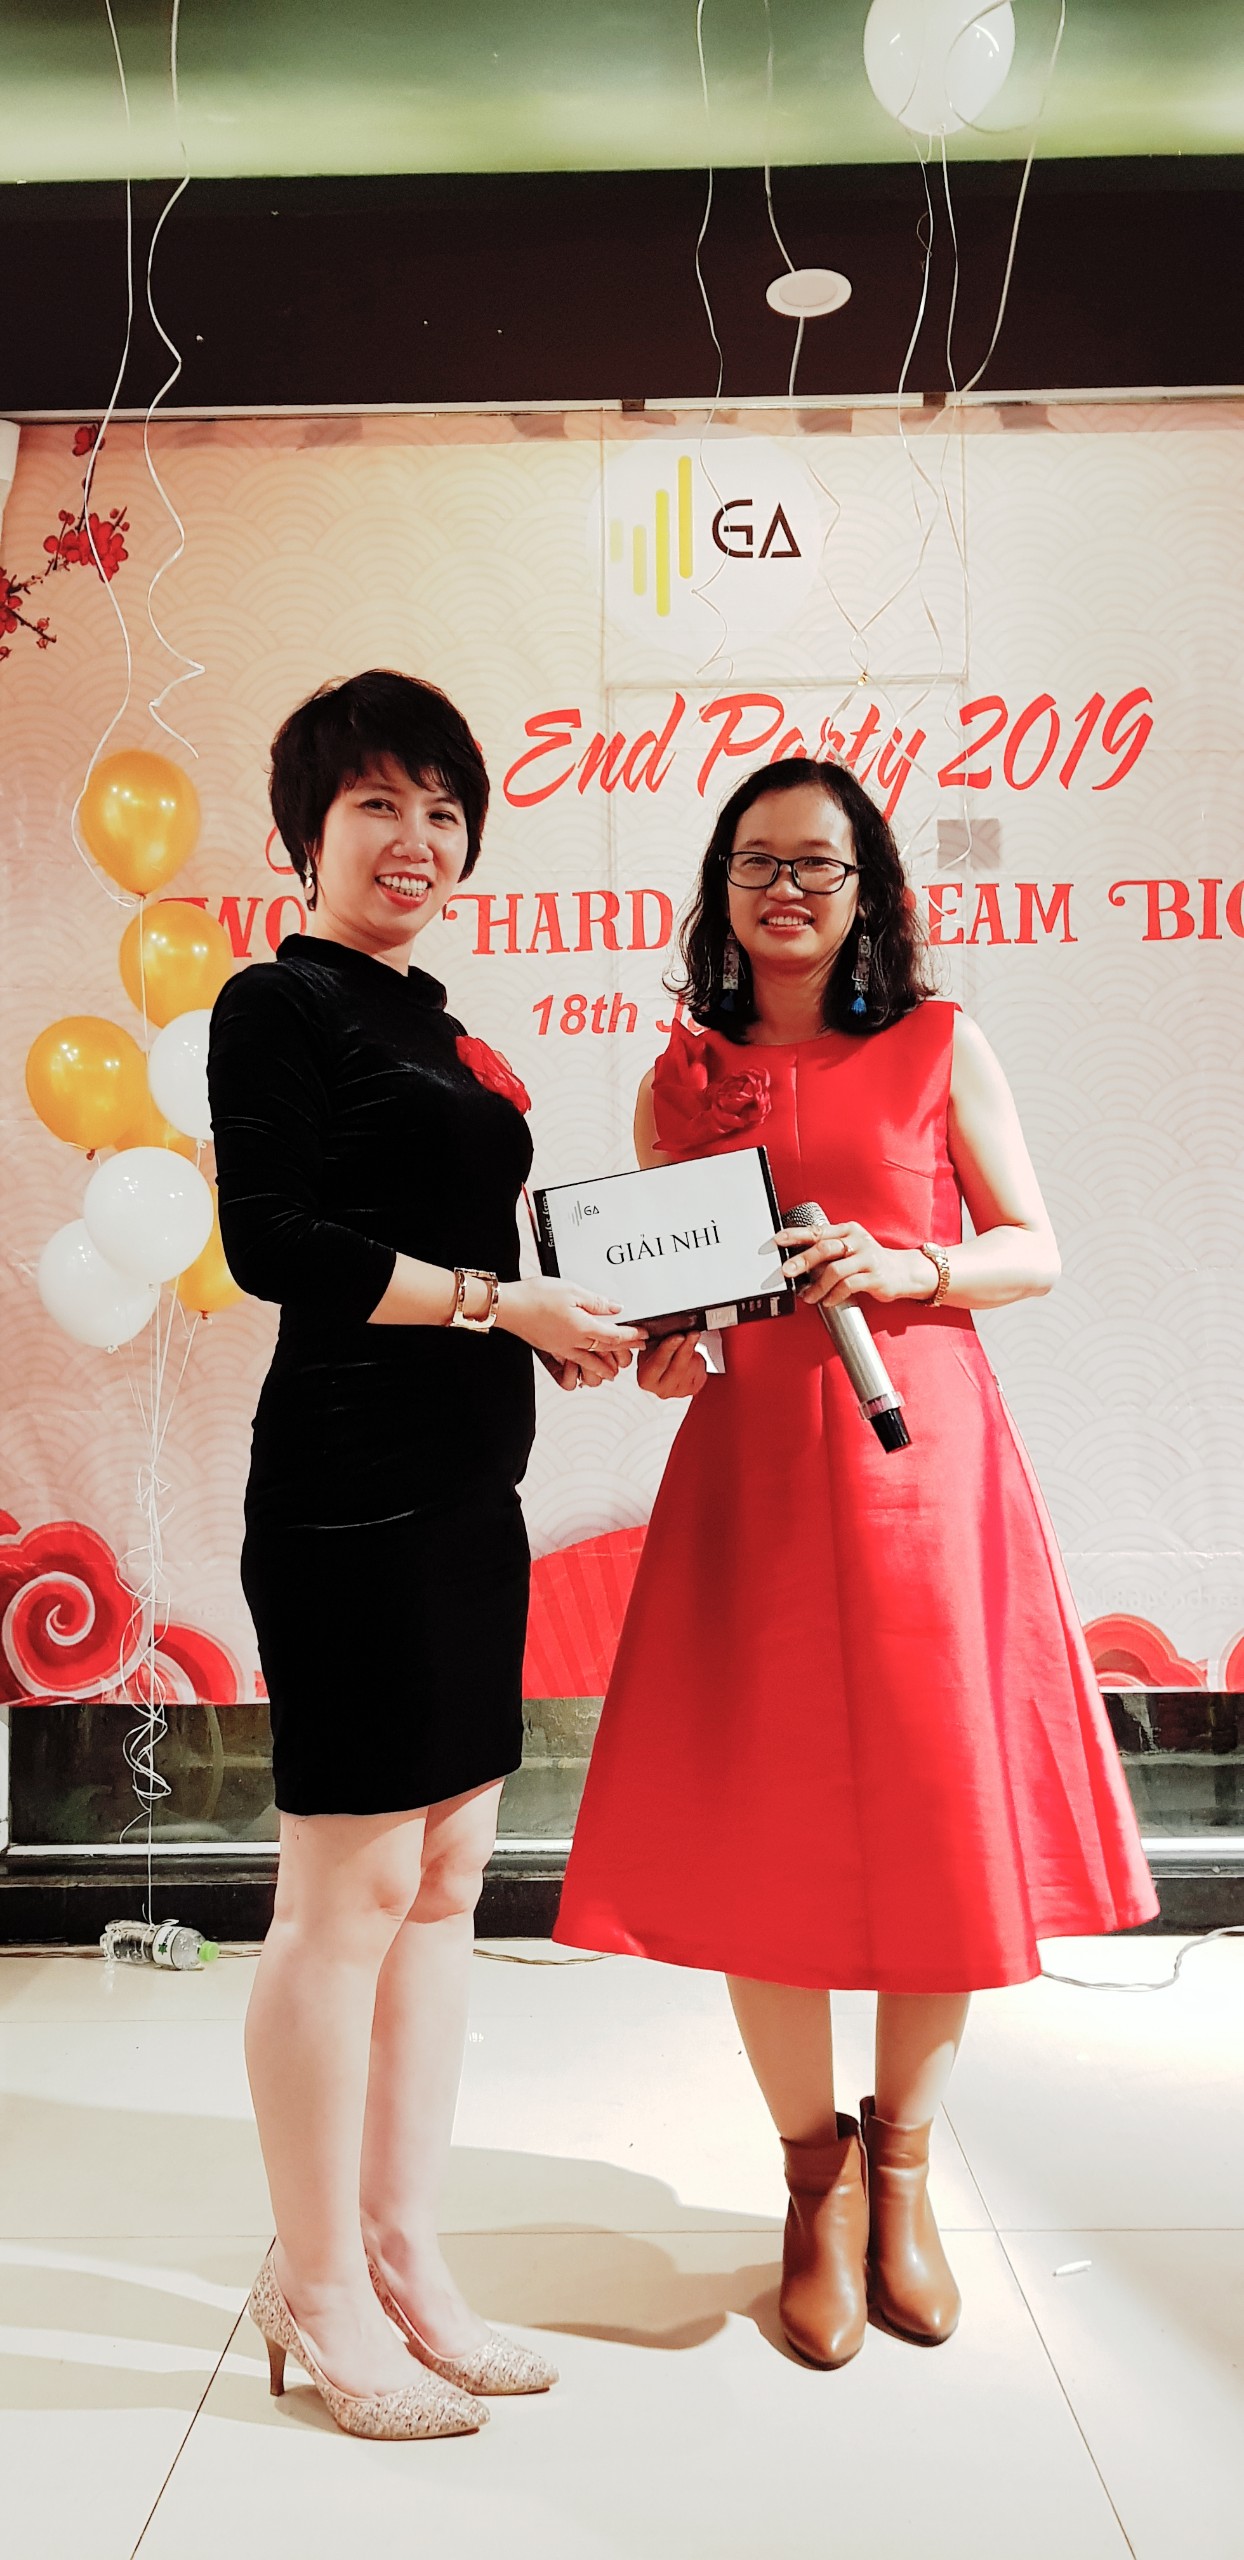 Year End Party 2019 lucky draw giai nhi